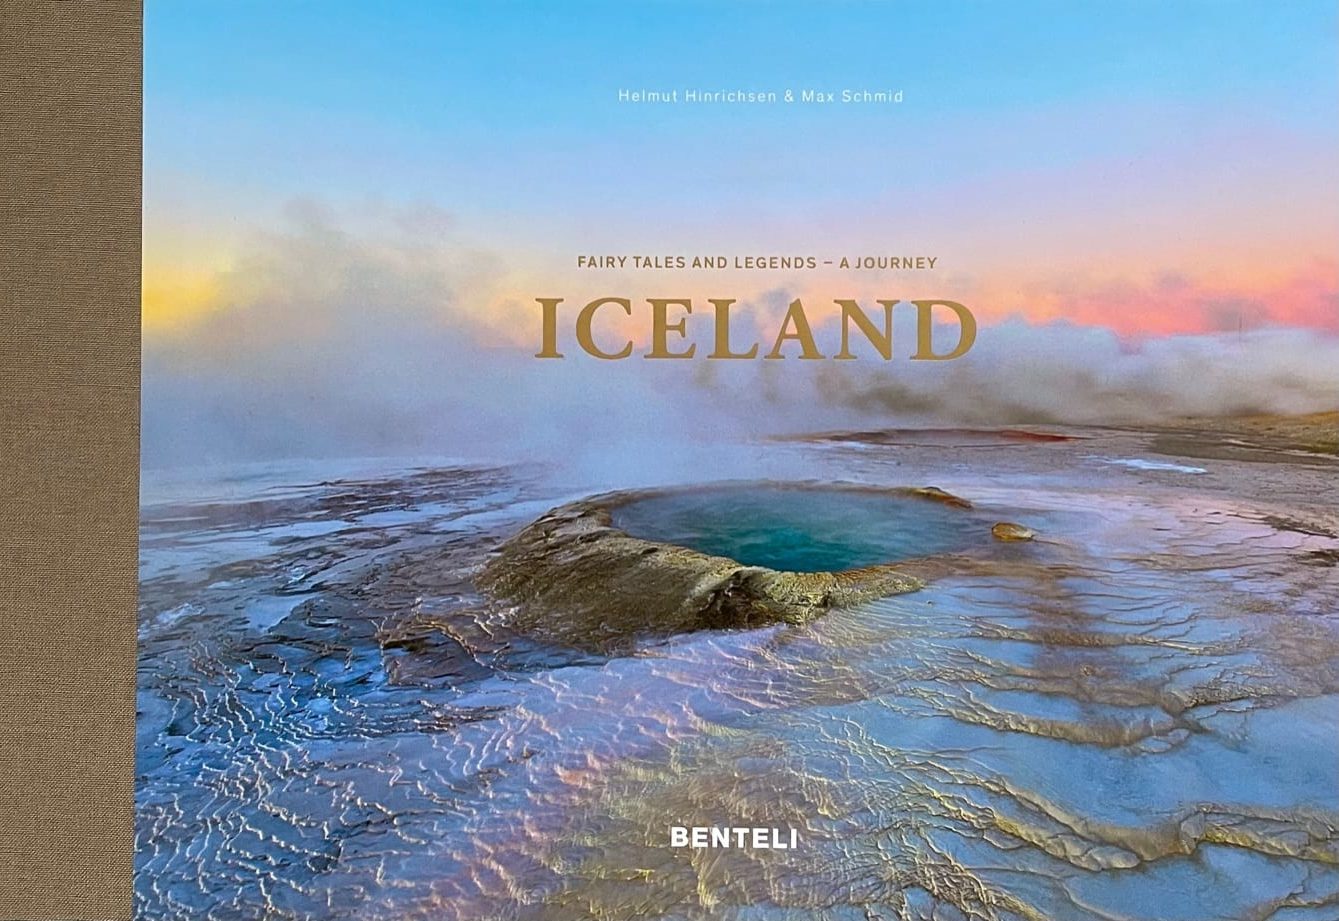 Iceland - A Journey